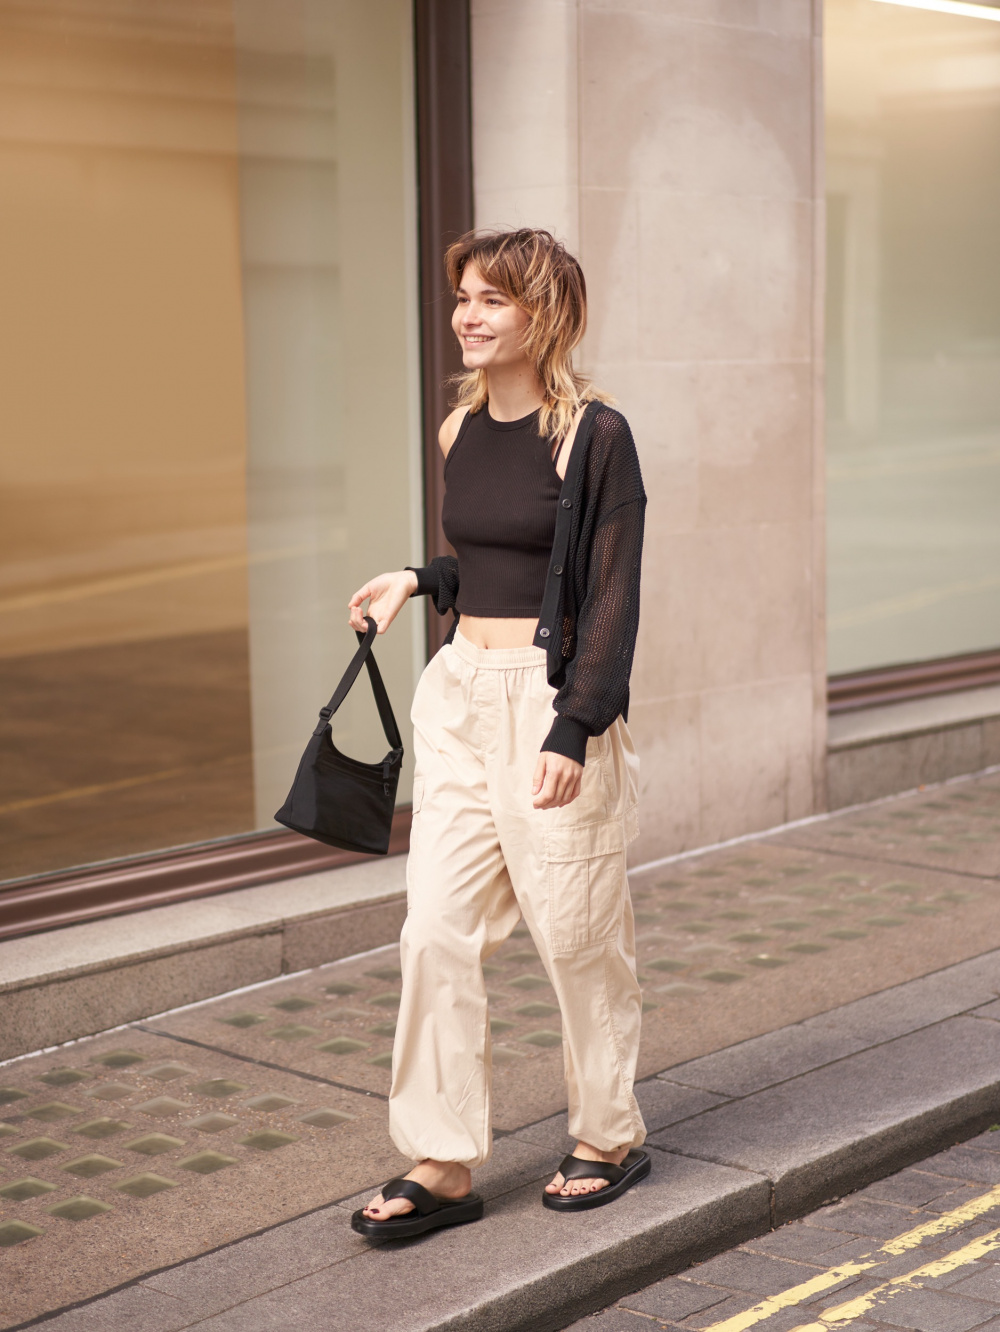 White Cargo Pants with White and Brown Sneakers Outfits (11 ideas & outfits)